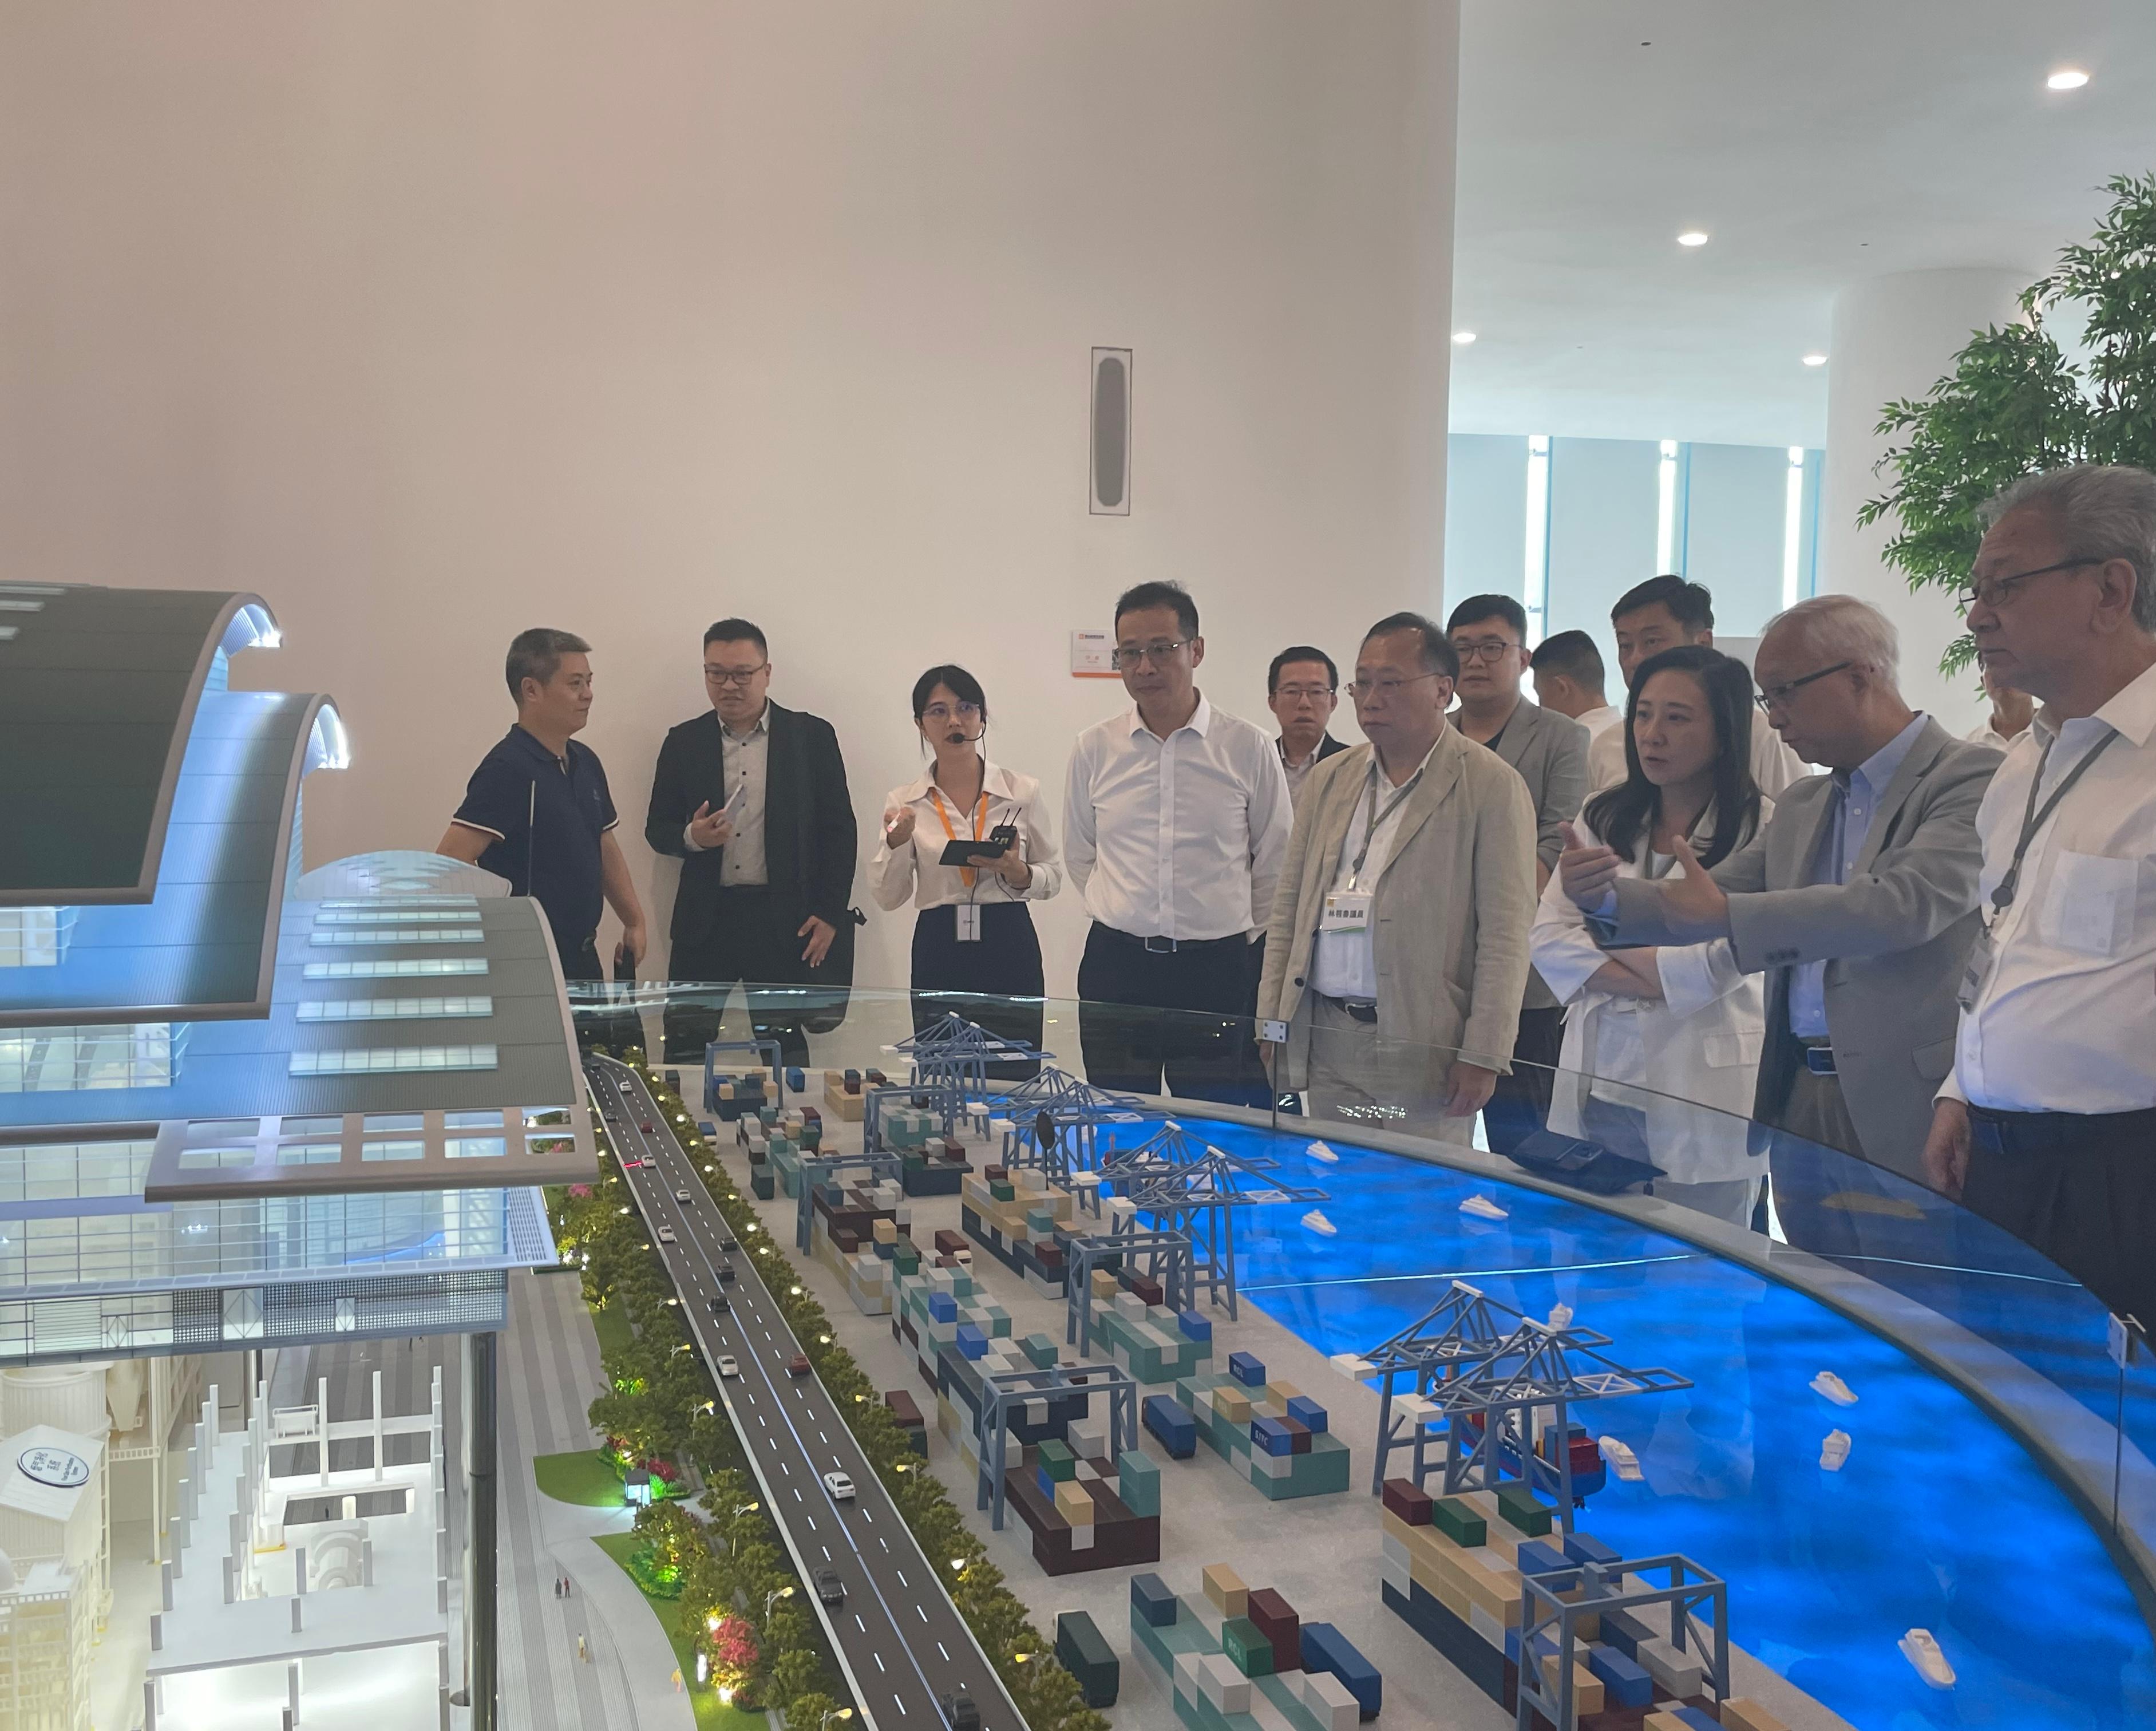 The Secretary for Environment and Ecology, Mr Tse Chin-wan, together with the Legislative Council Panel on Environmental Affairs, today (August 9) visited the Nanshan Energy Eco-Park in Shenzhen in the afternoon. Photo shows Mr Tse (seocnd right), and the delegation of the Legislative Council Panel on Environmental Affairs, receiving a briefing from a representative on the operation of the Park.